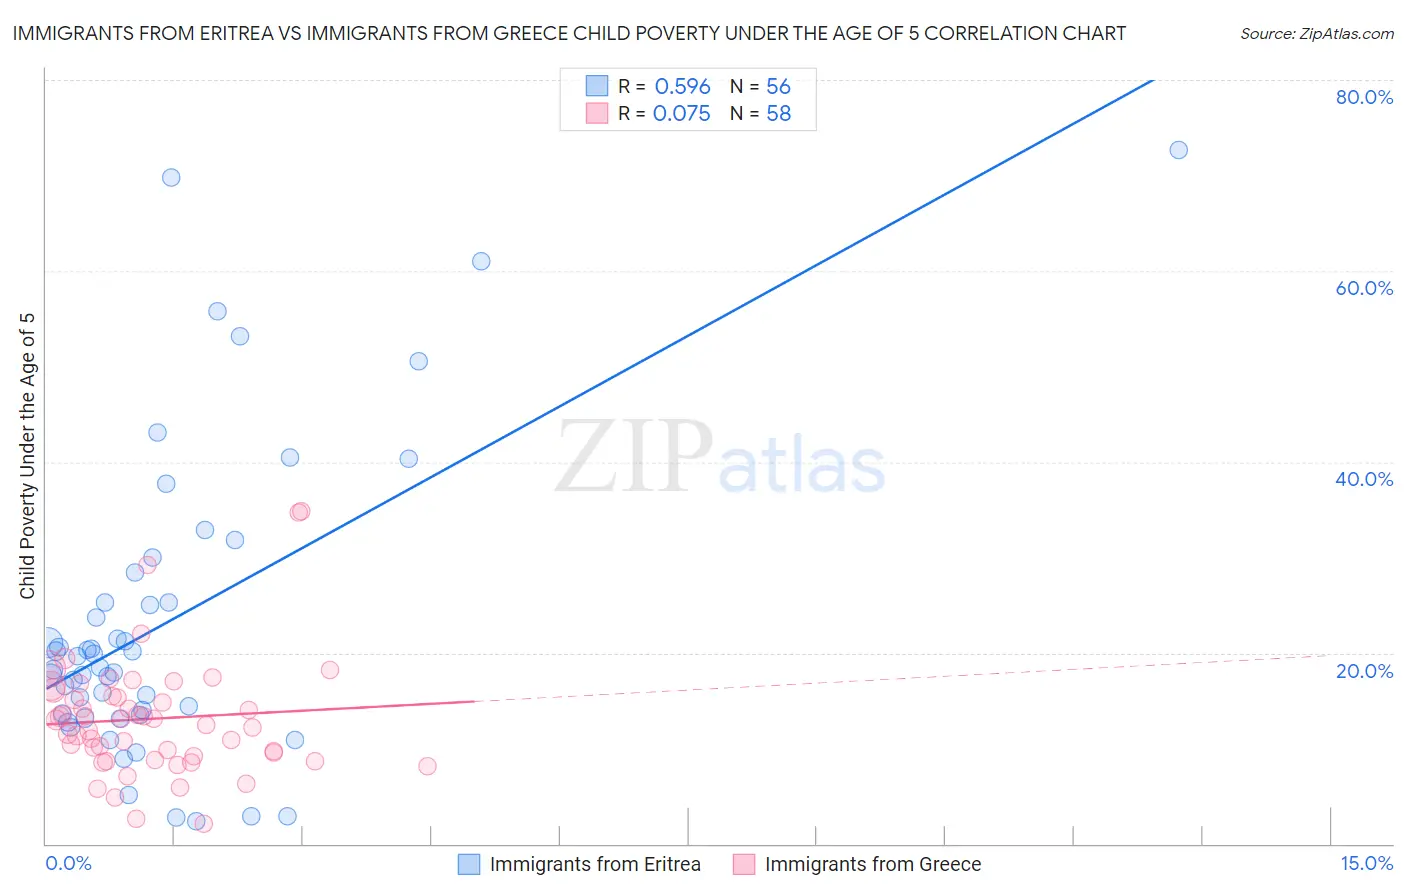 Immigrants from Eritrea vs Immigrants from Greece Child Poverty Under the Age of 5